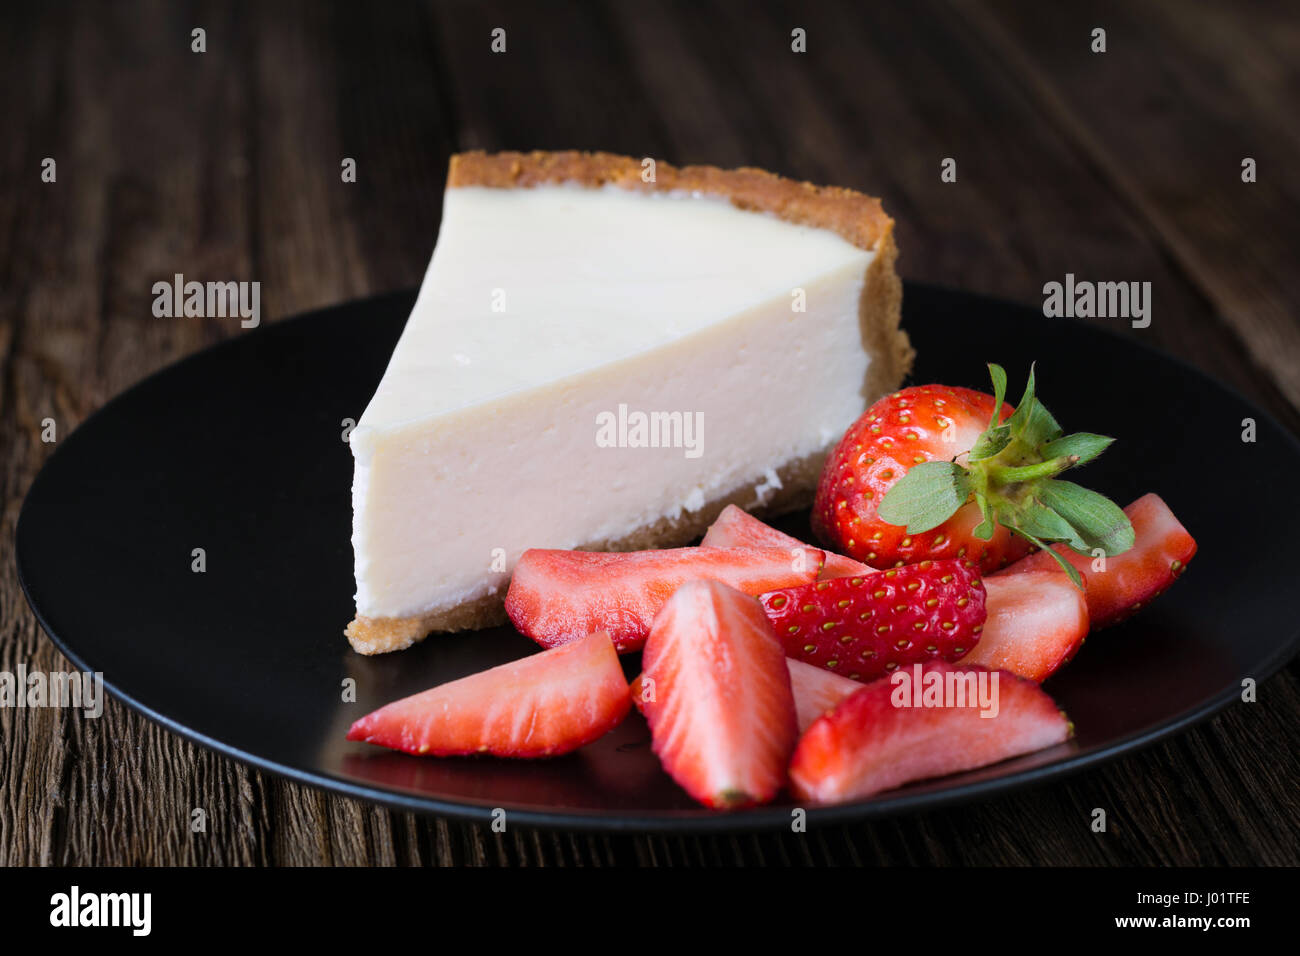 Cheesecake with fresh strawberries on black plate. Slice of plain cheesecake. Wooden table background Stock Photo